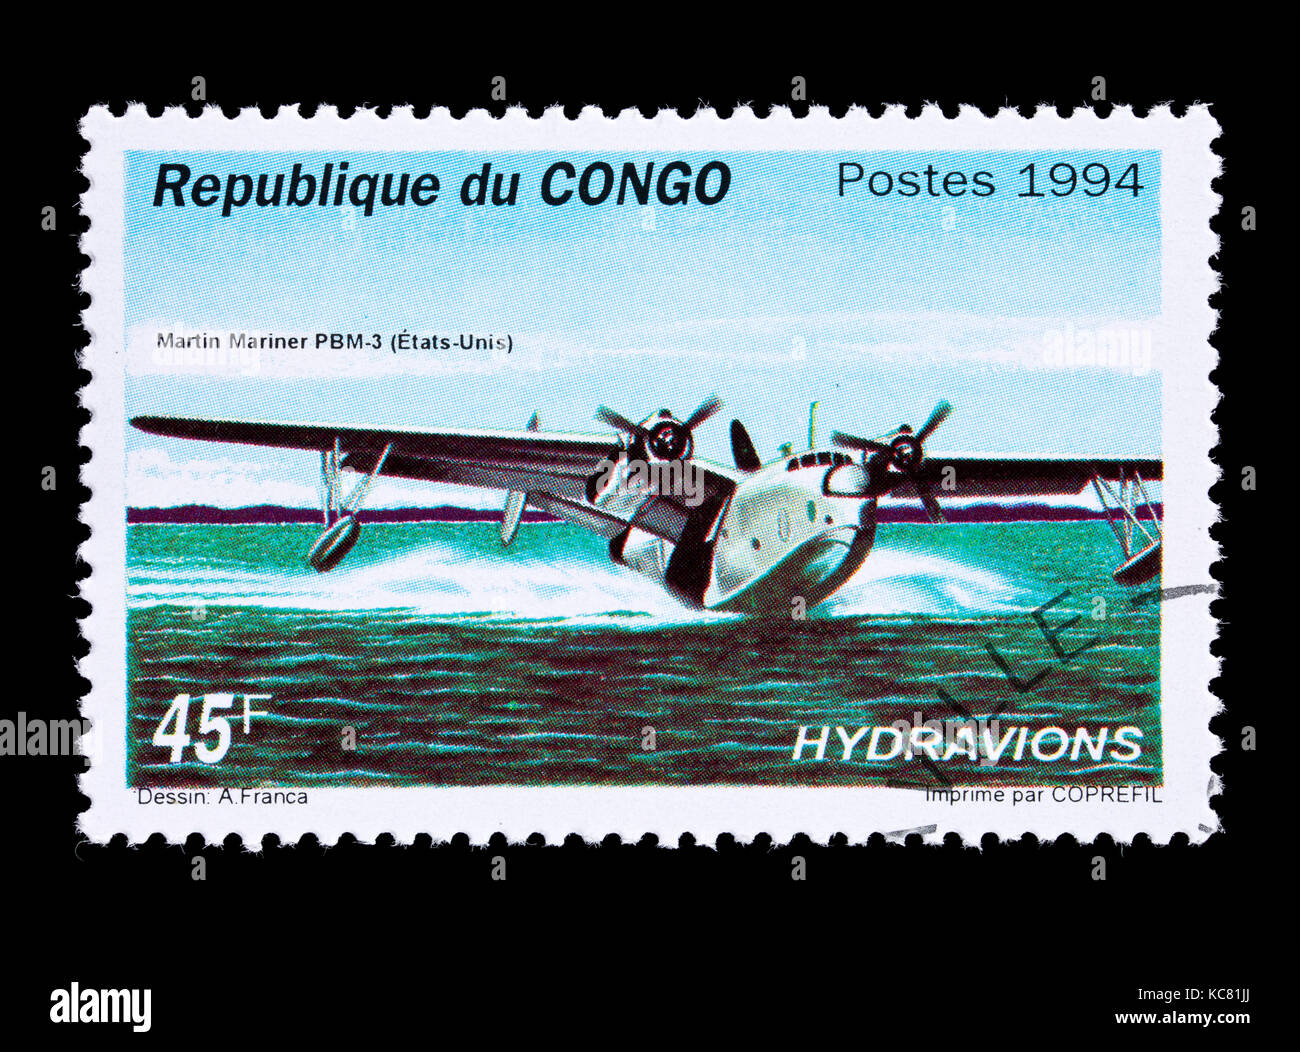 Postage stamp from Congo depicting a Martin Mariner PBM-3 seaplane from the United States. Stock Photo